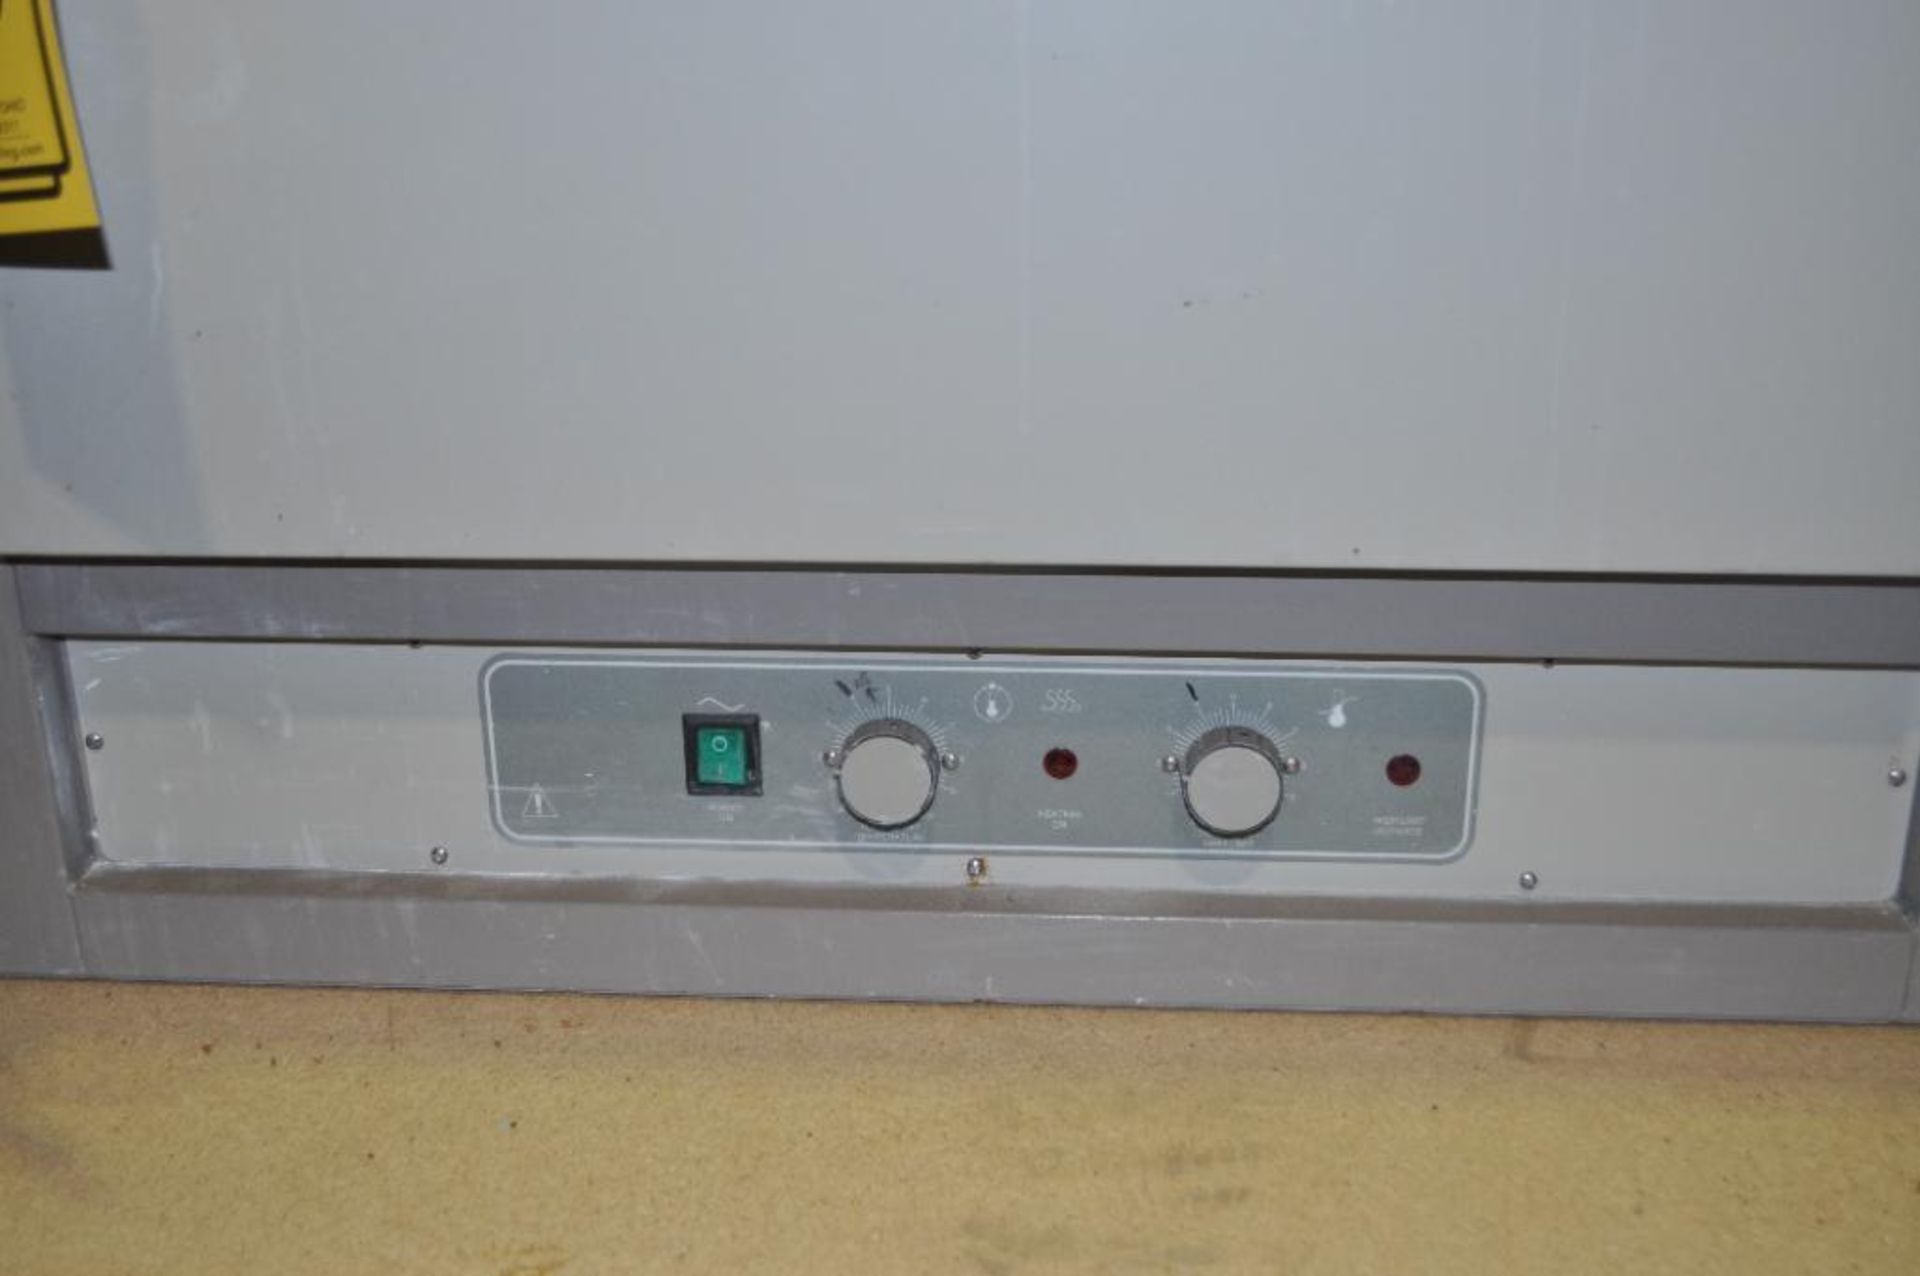 VWR SCIENTIFIC PRODUCTS FORCED AIR OVEN, MODEL: 1370 F, 120 VOLTS - Image 3 of 6